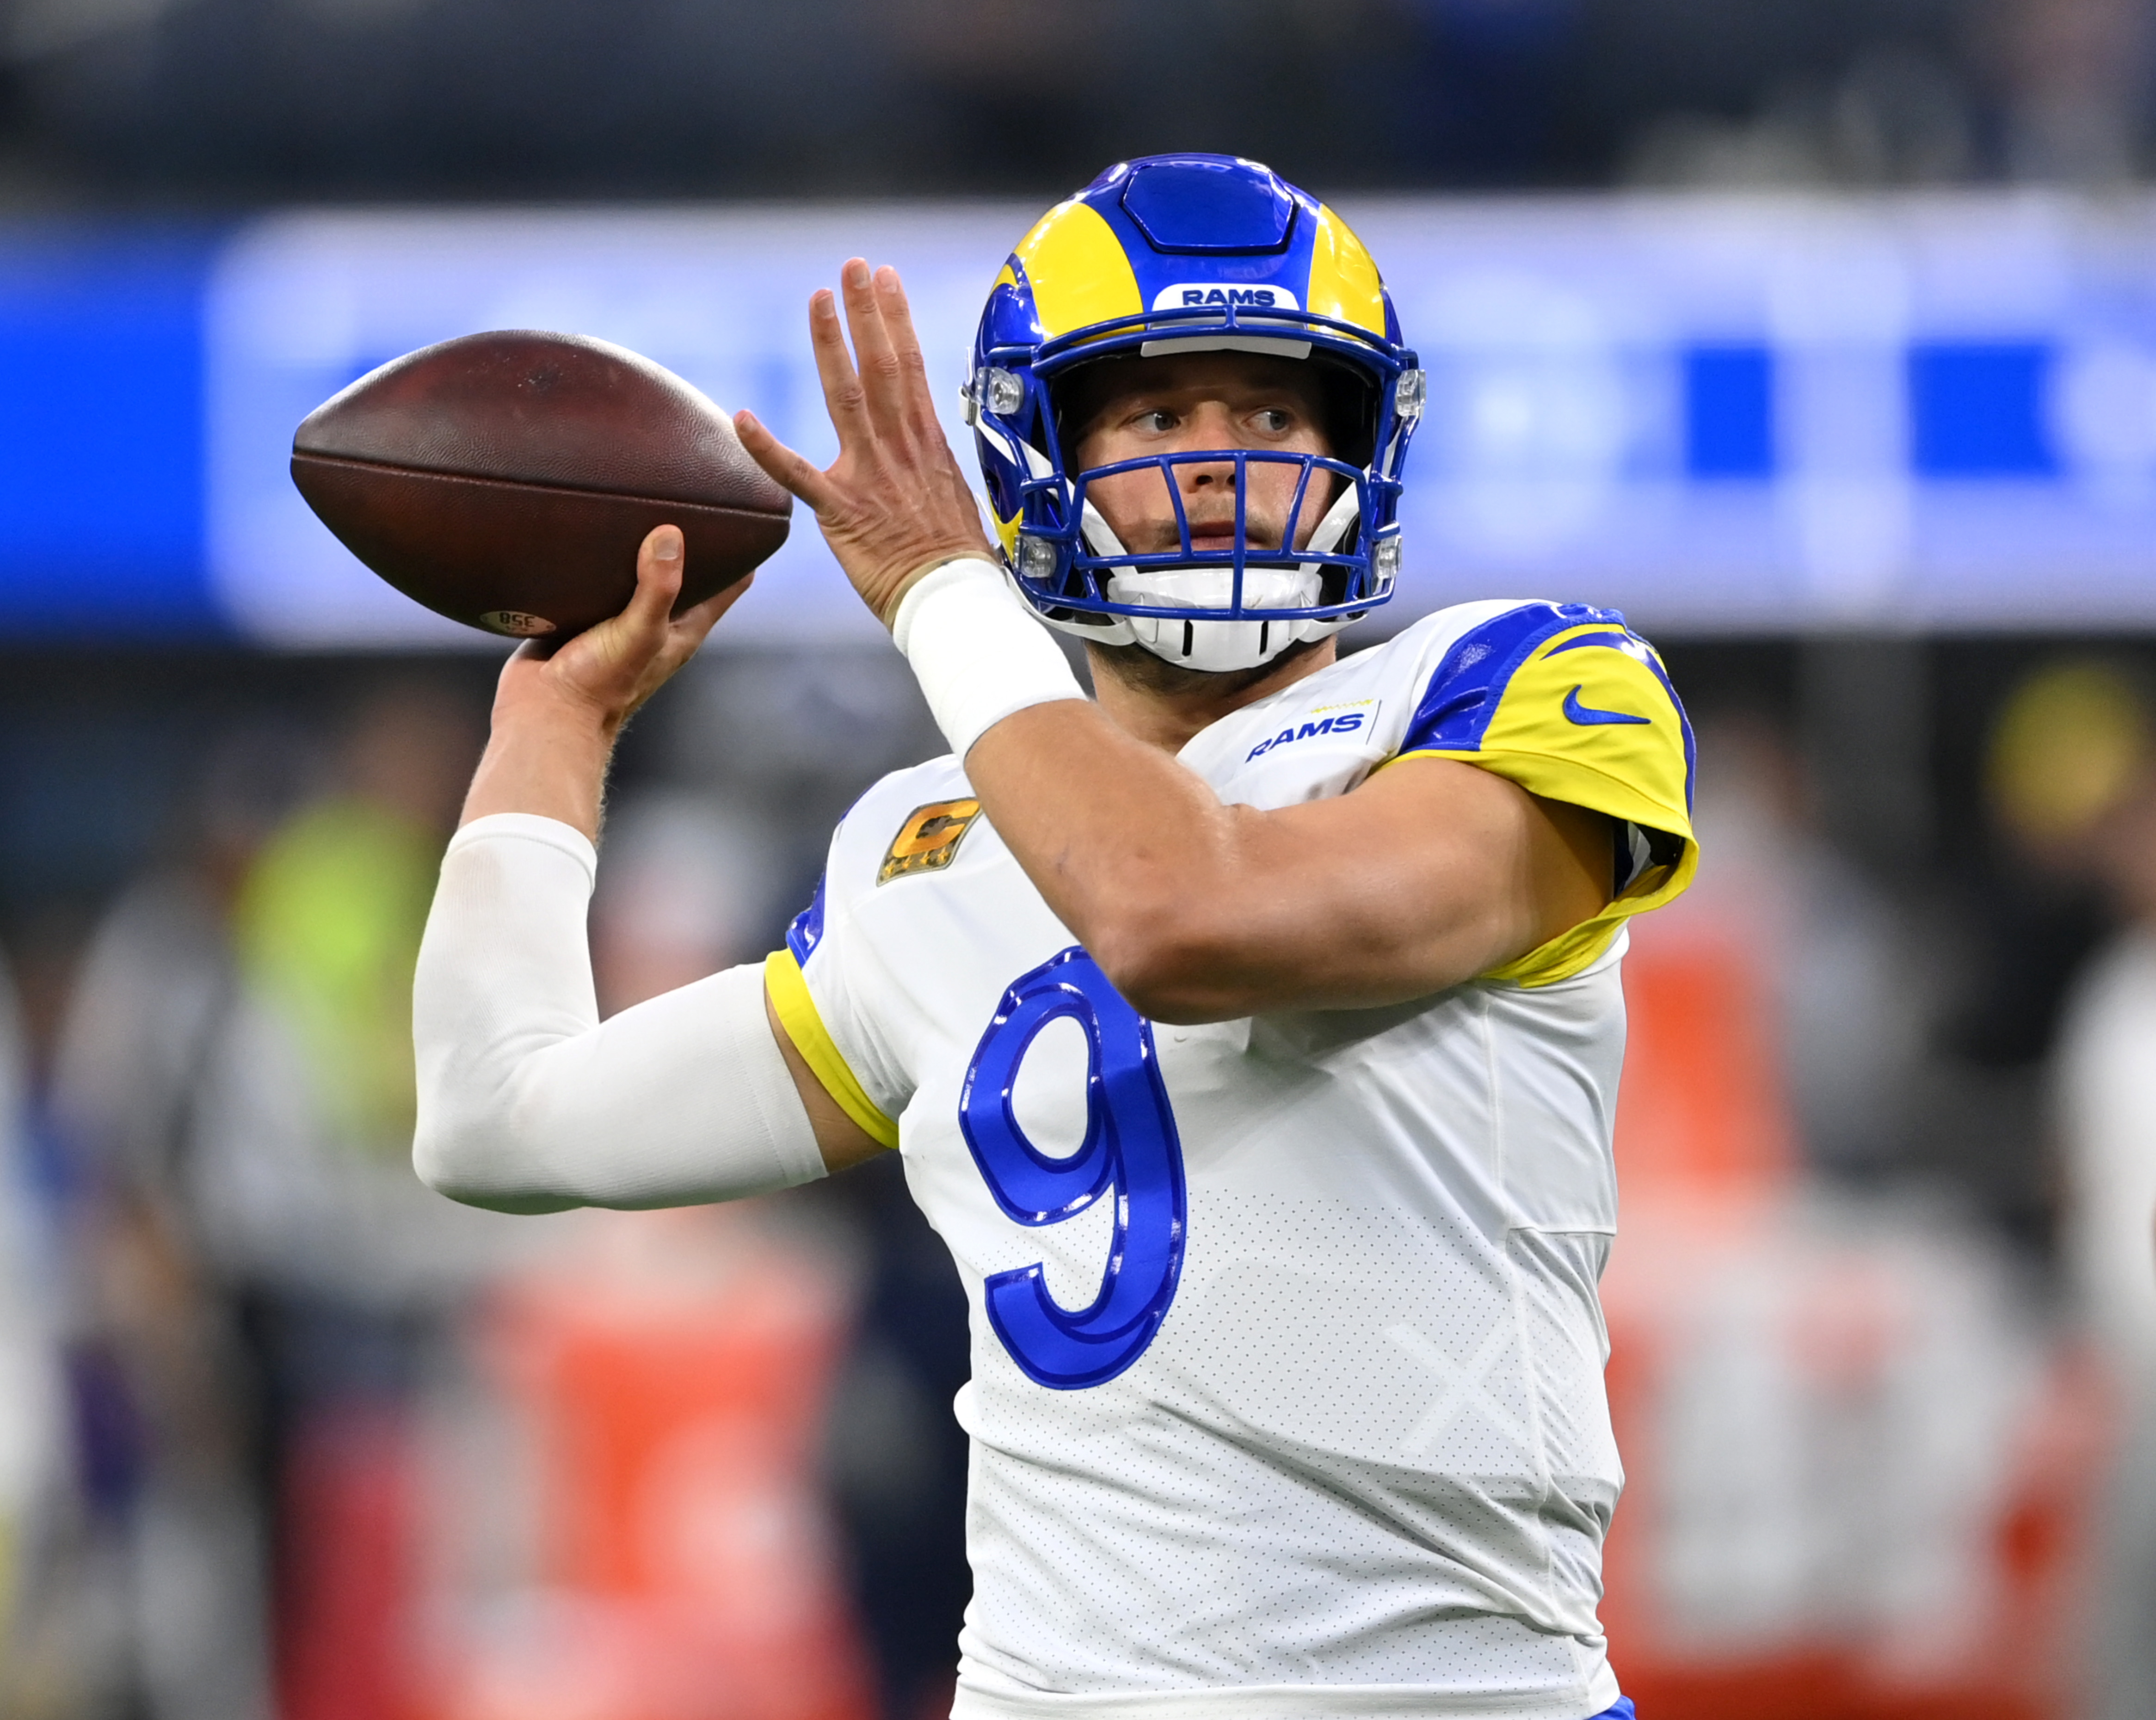 What Are the Rams' and Bengals' Records in the Uniforms They'll Be Wearing in Super Bowl LVI?